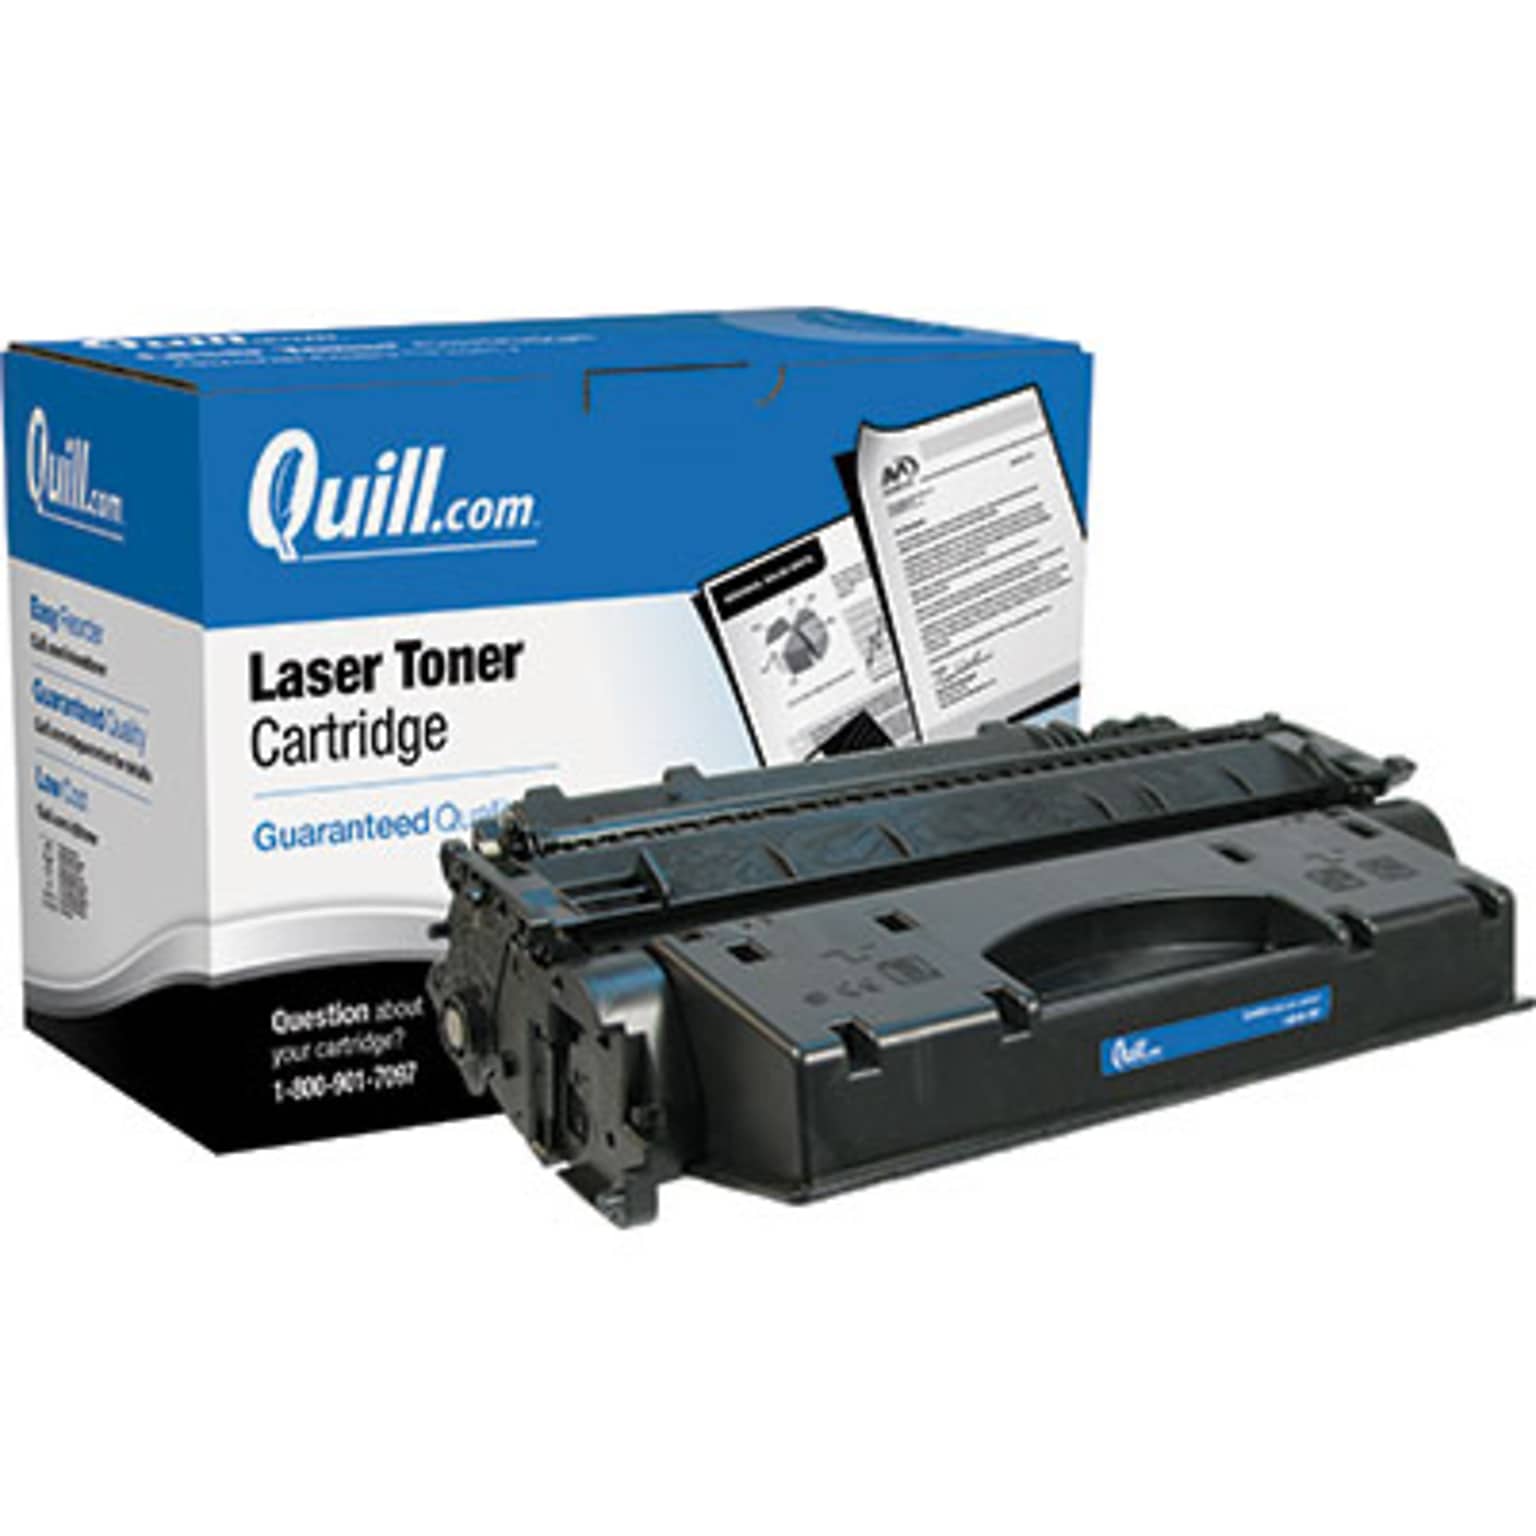 Quill Brand Remanufactured Laser Toner Cartridge Comparable to Canon® 120 Black (100% Satisfaction Guaranteed)